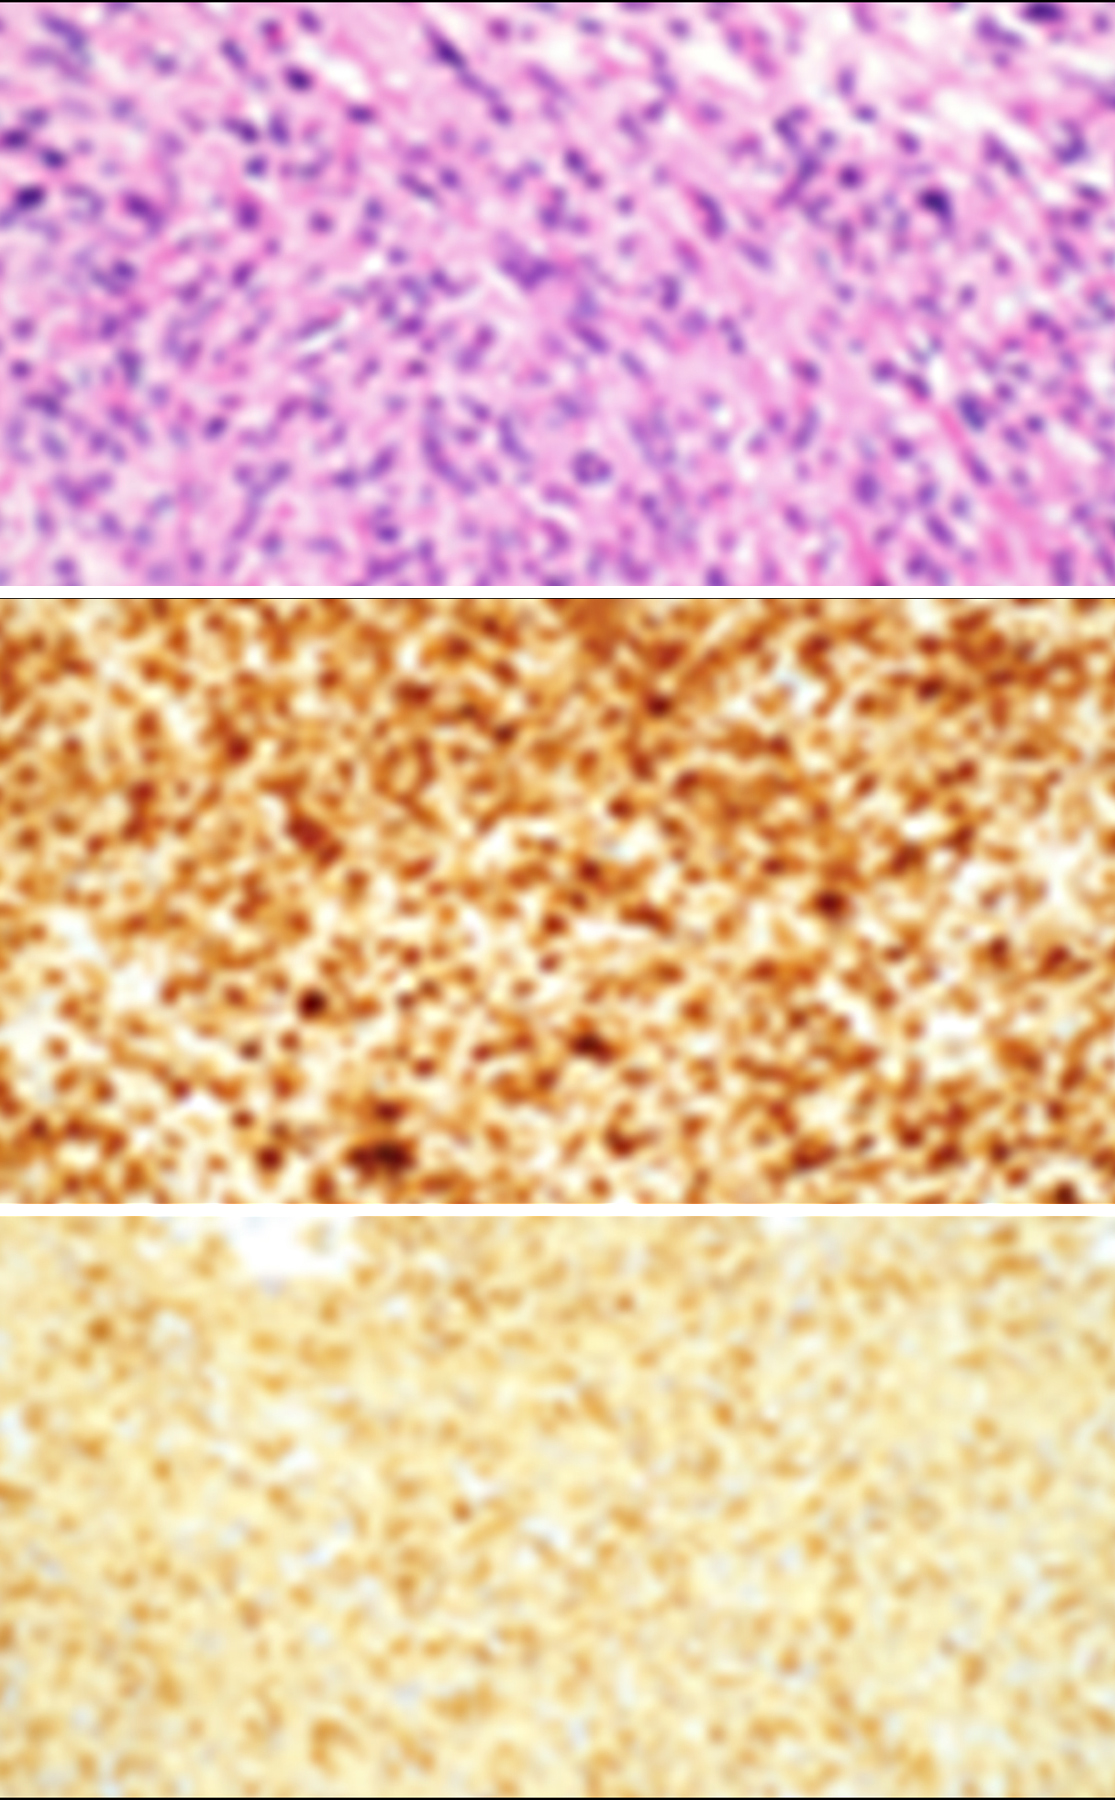 On hematoxylin and eosin stained sections, the pathology of the uterine tumor demonstrated spindle-shaped cells with eosinophilic cytoplasm and elongated, cigar-shaped nuclei with mitotic figures and areas of ischemic degeneration (A). The lesion was immunopositive for desmin (B) and smooth muscle actin (C), in keeping with a leiomyosarcoma